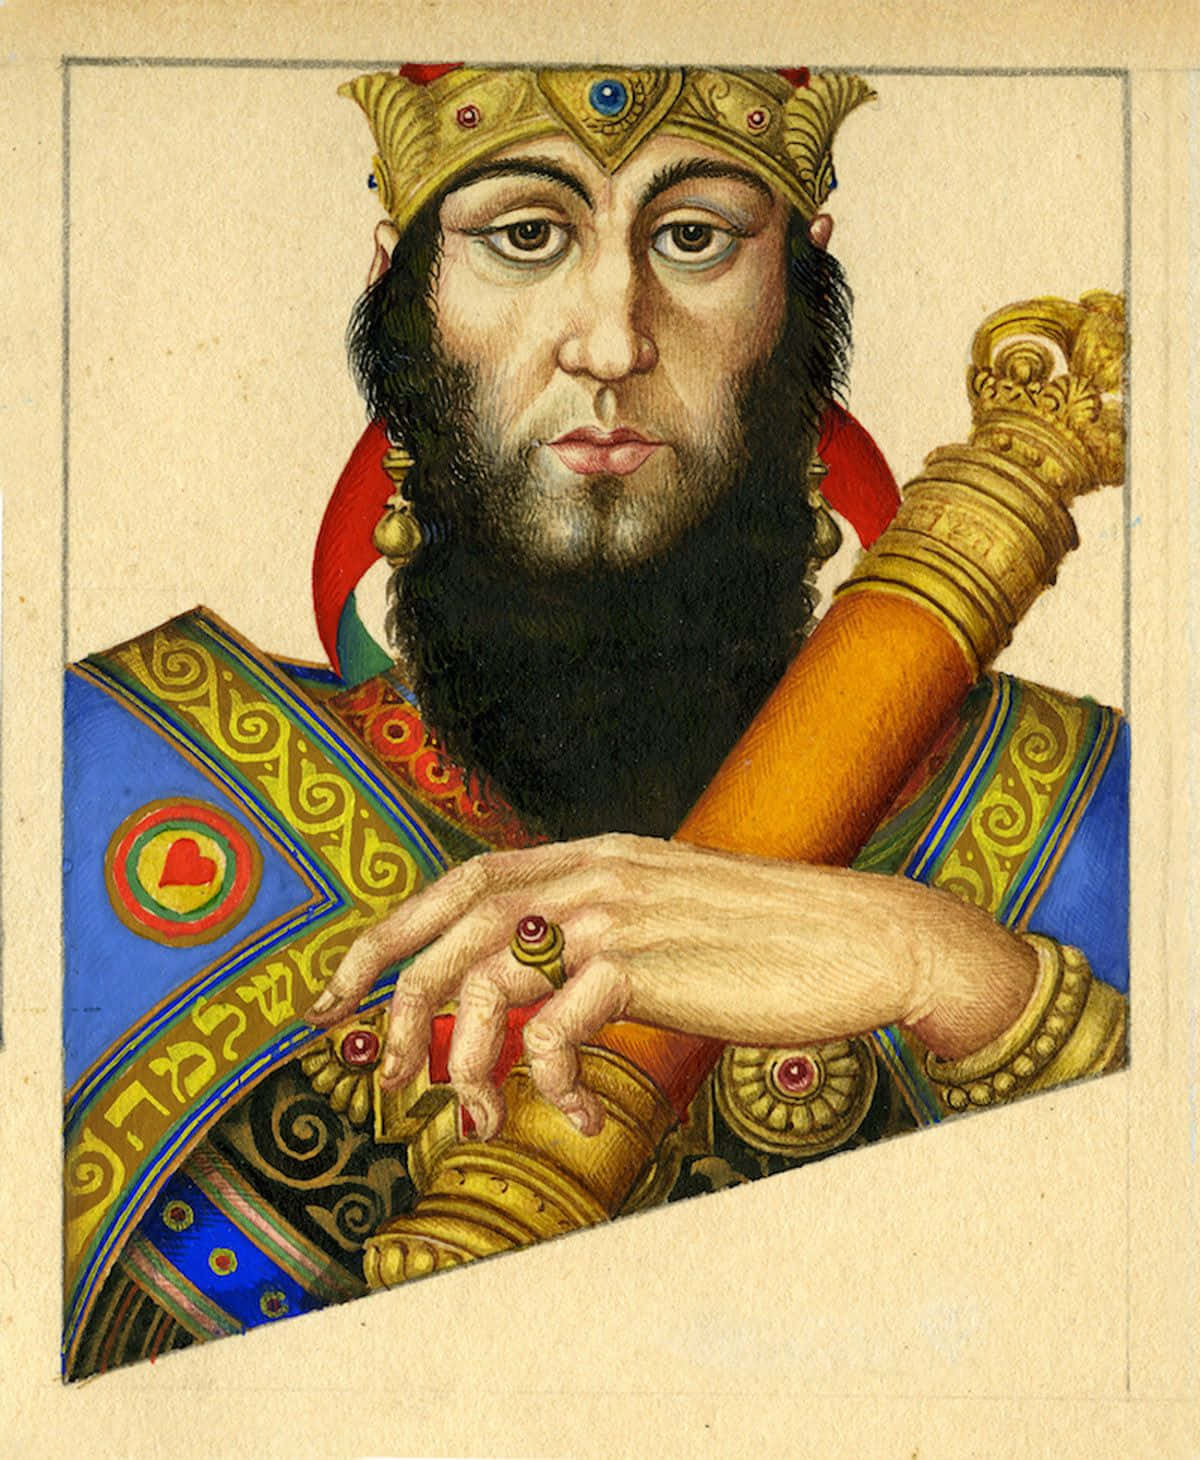 King Solomon, the Wise Ruler of Israel